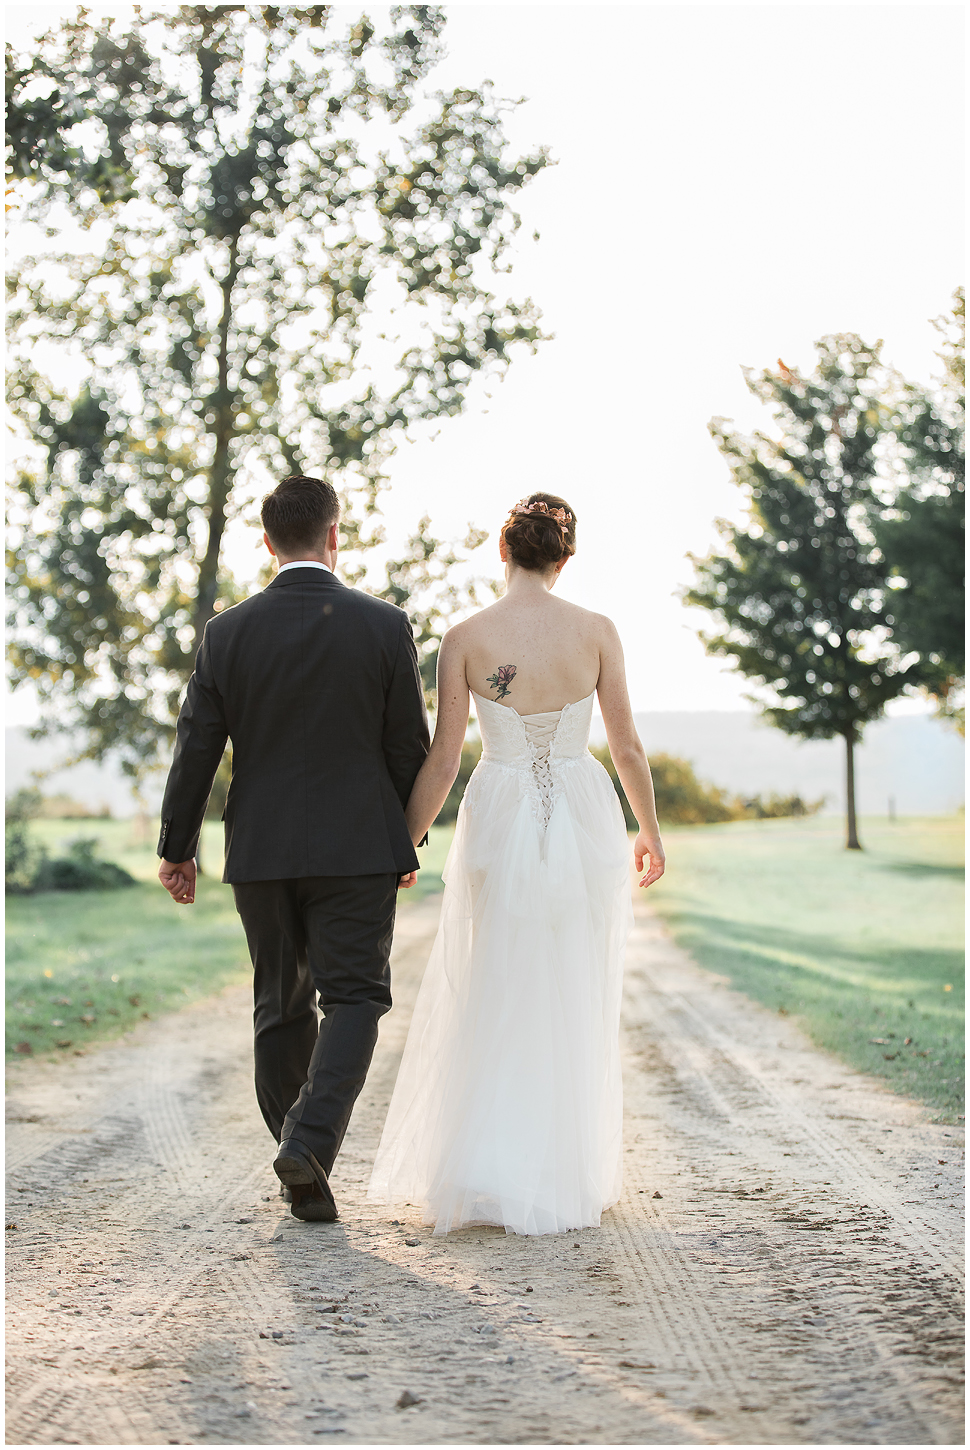 Bride and groom walk hand in hand on a dirt path. Shown from behind. 